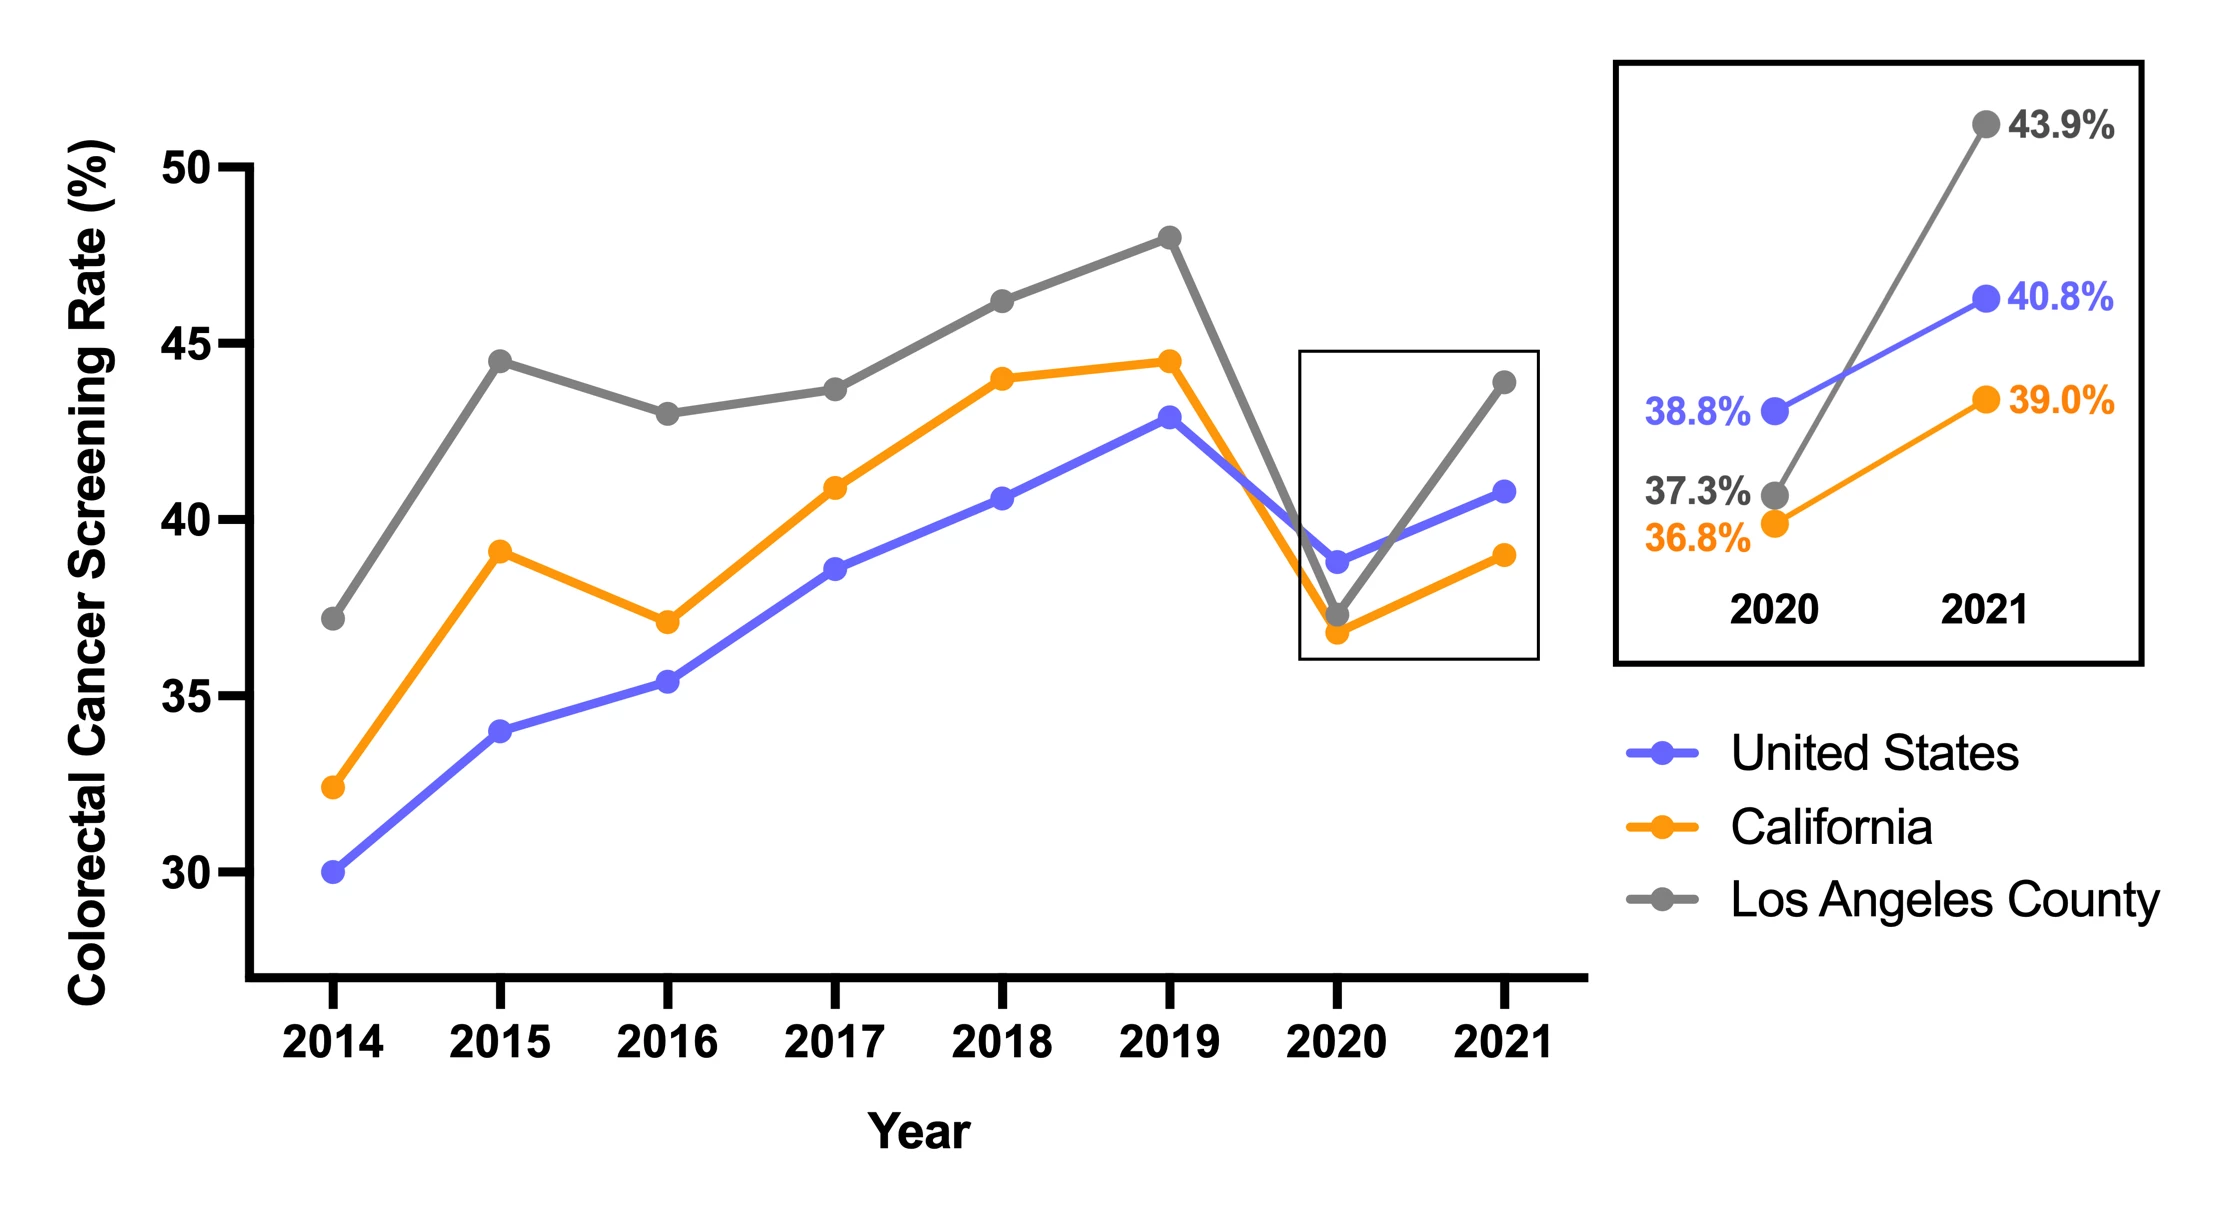 <b>Figure.</b> Annual median colorectal cancer screening rates in Federally Qualified Health Centers in the United States (blue), in California State (orange), and in Los Angeles County (gray) from 2014 to 2021.